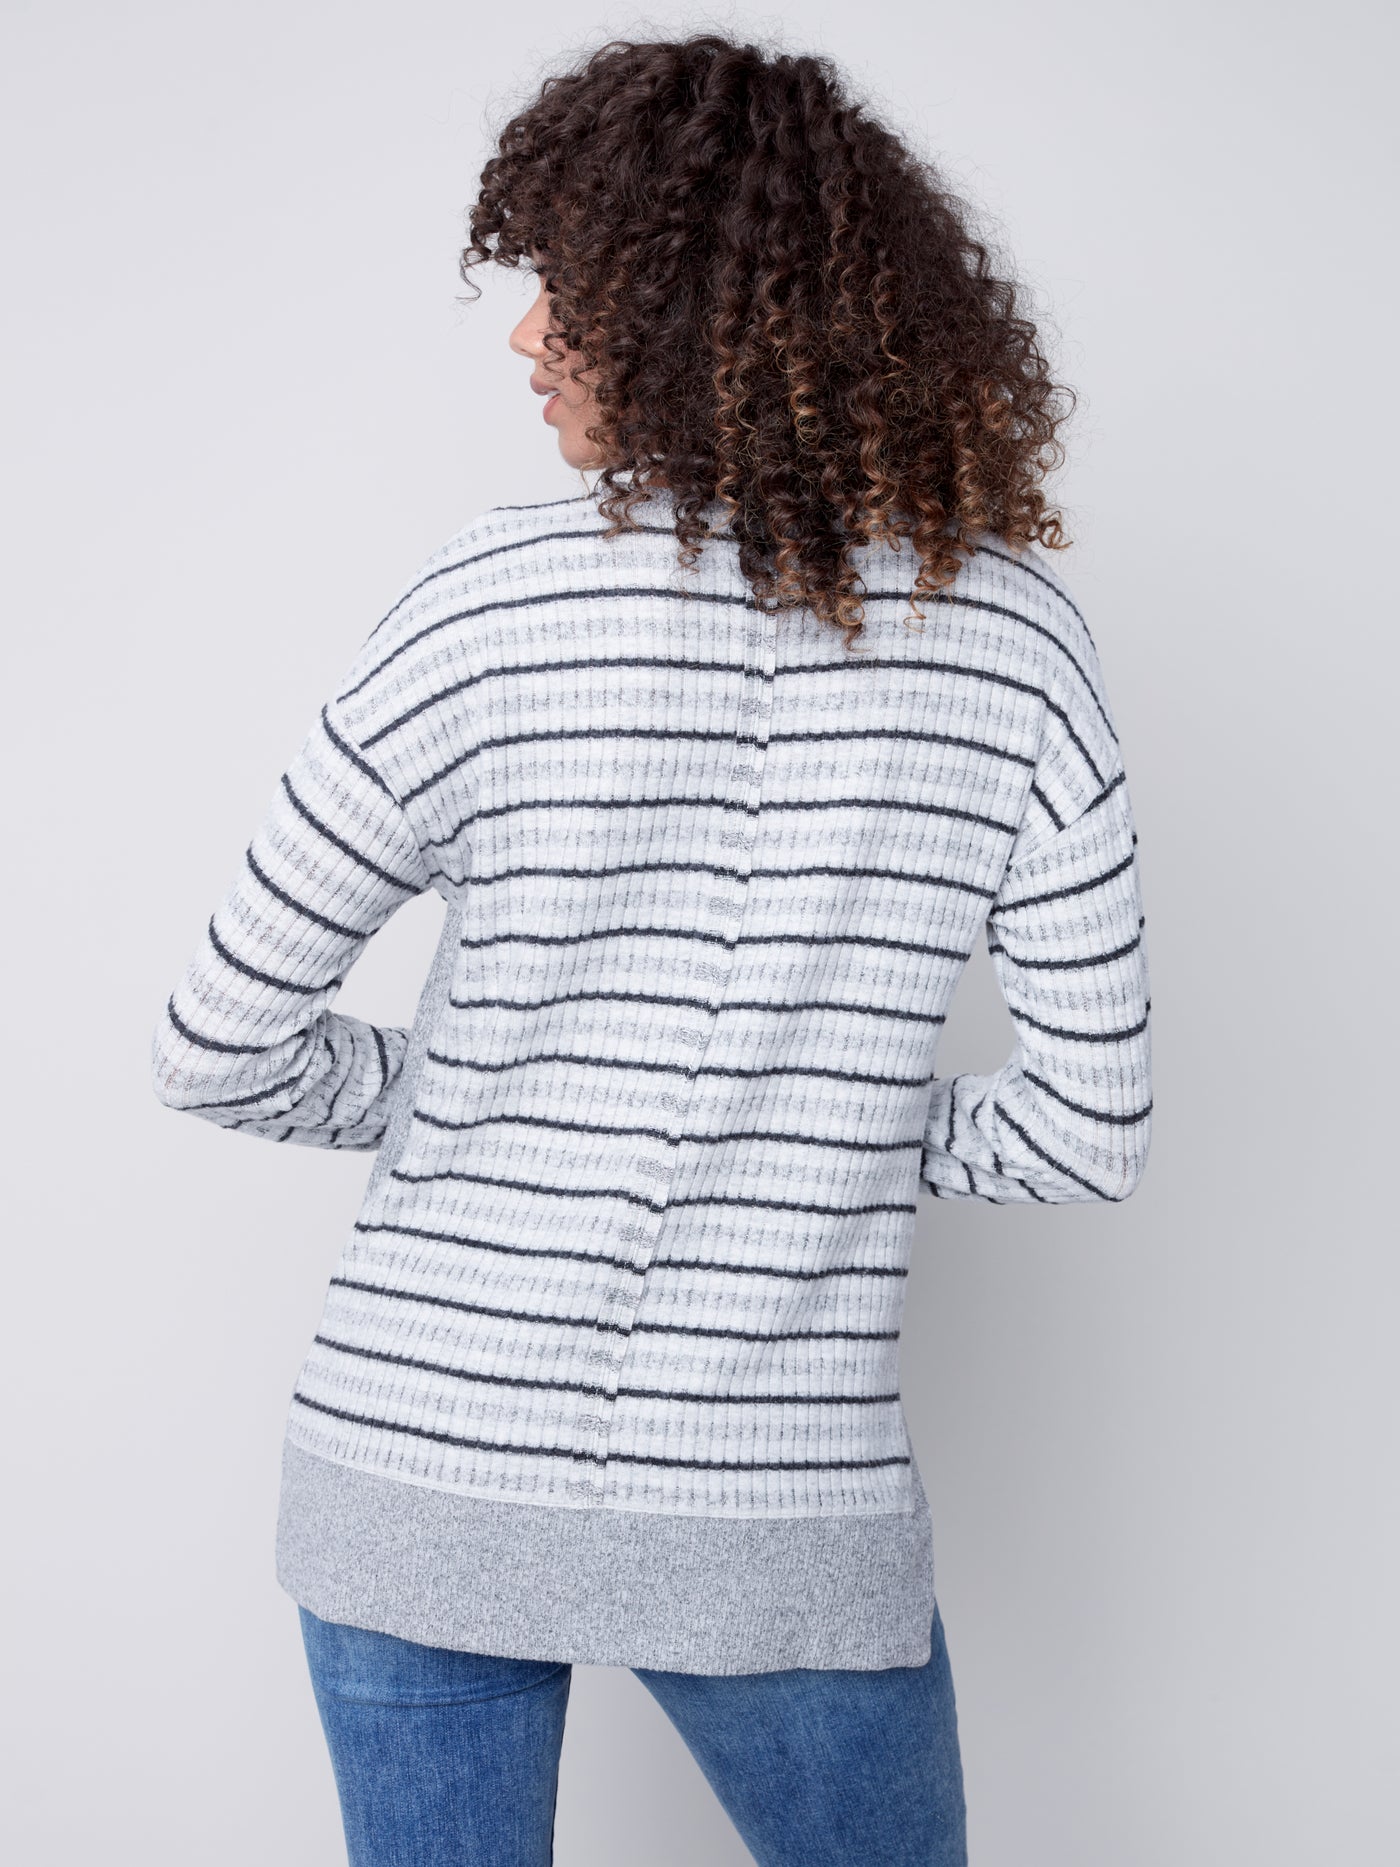 Charlie B Top - Striped Crew Sweater - Grey /White - XSMALL